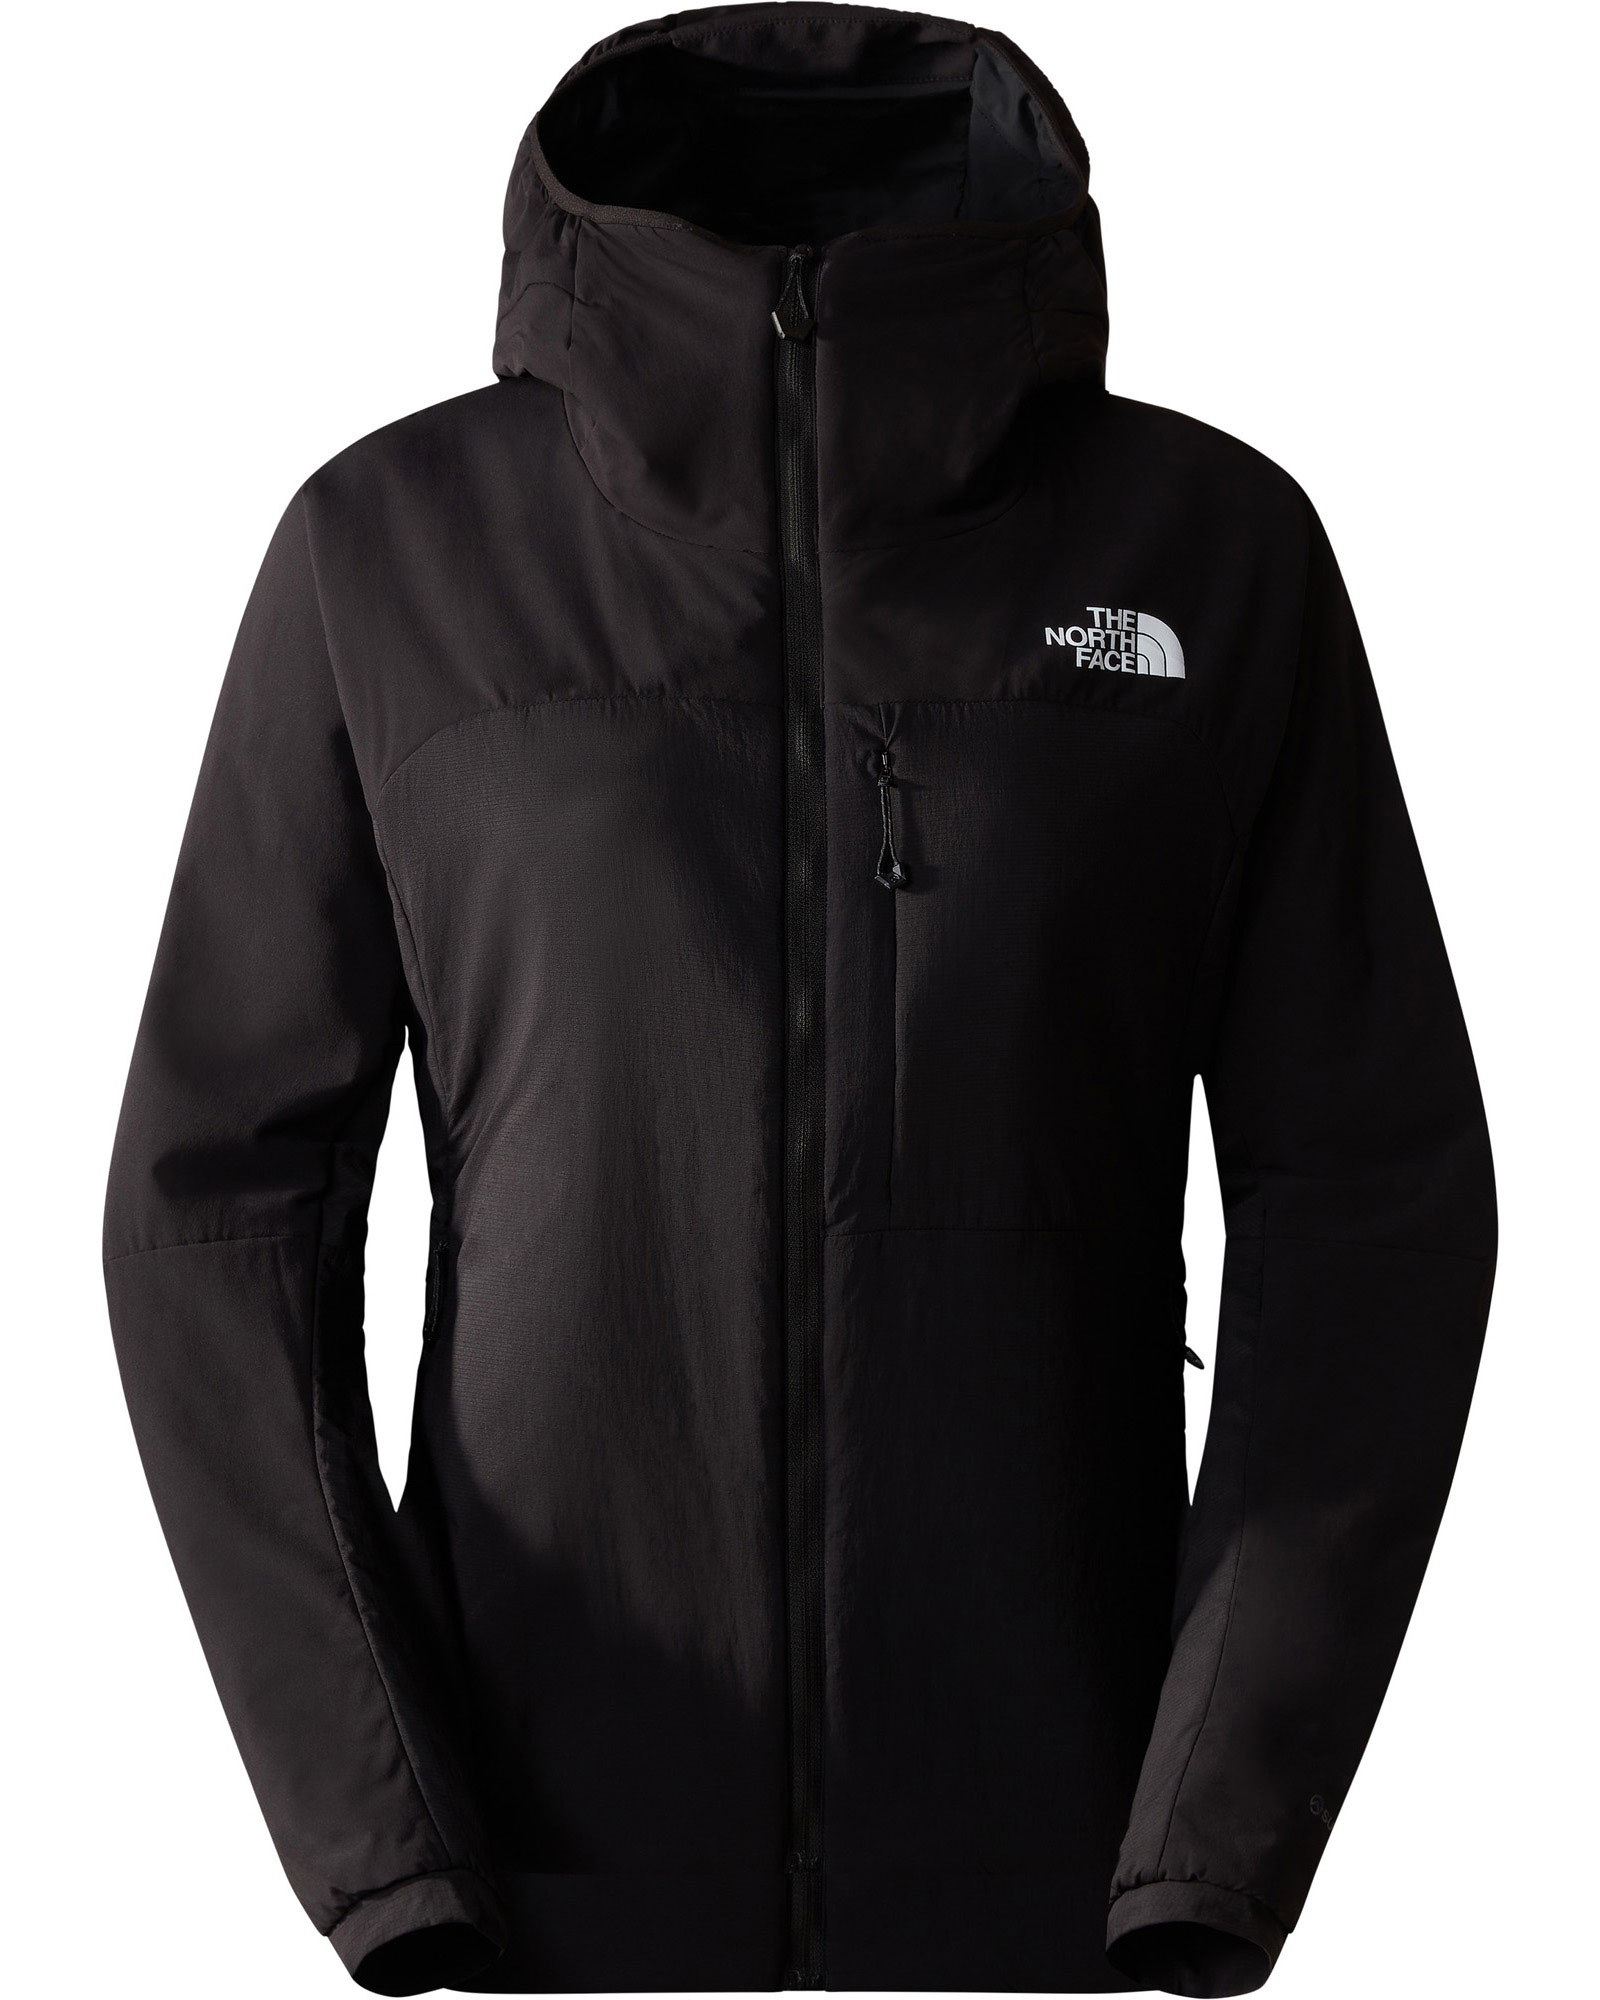 The North Face Summit Casaval Women’s Hoodie - TNF Black XS